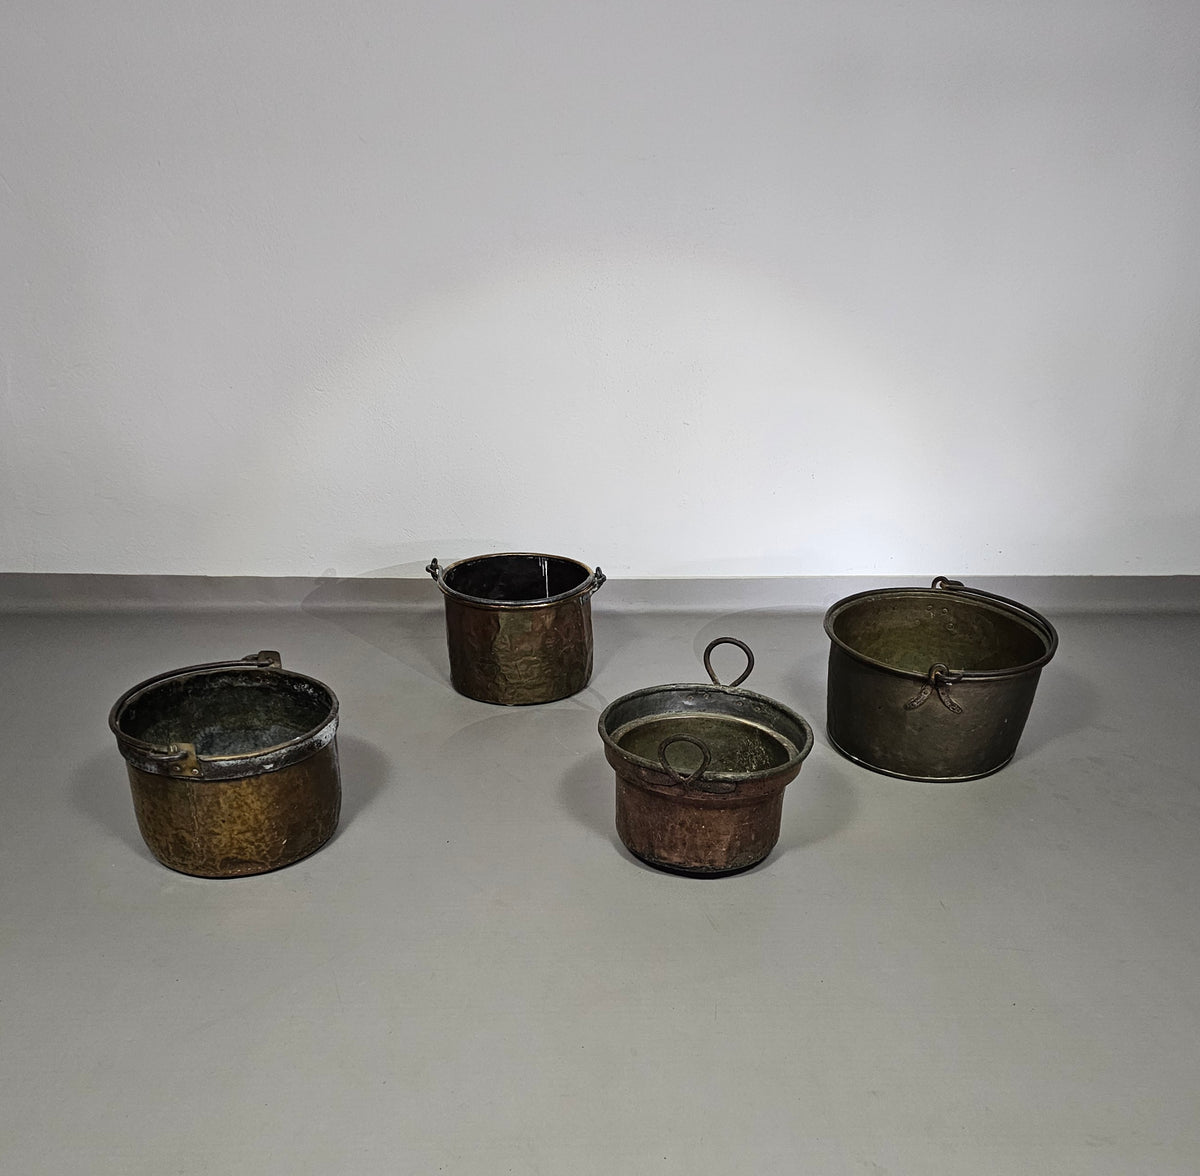 4 x fireplace bucket / price is for the set